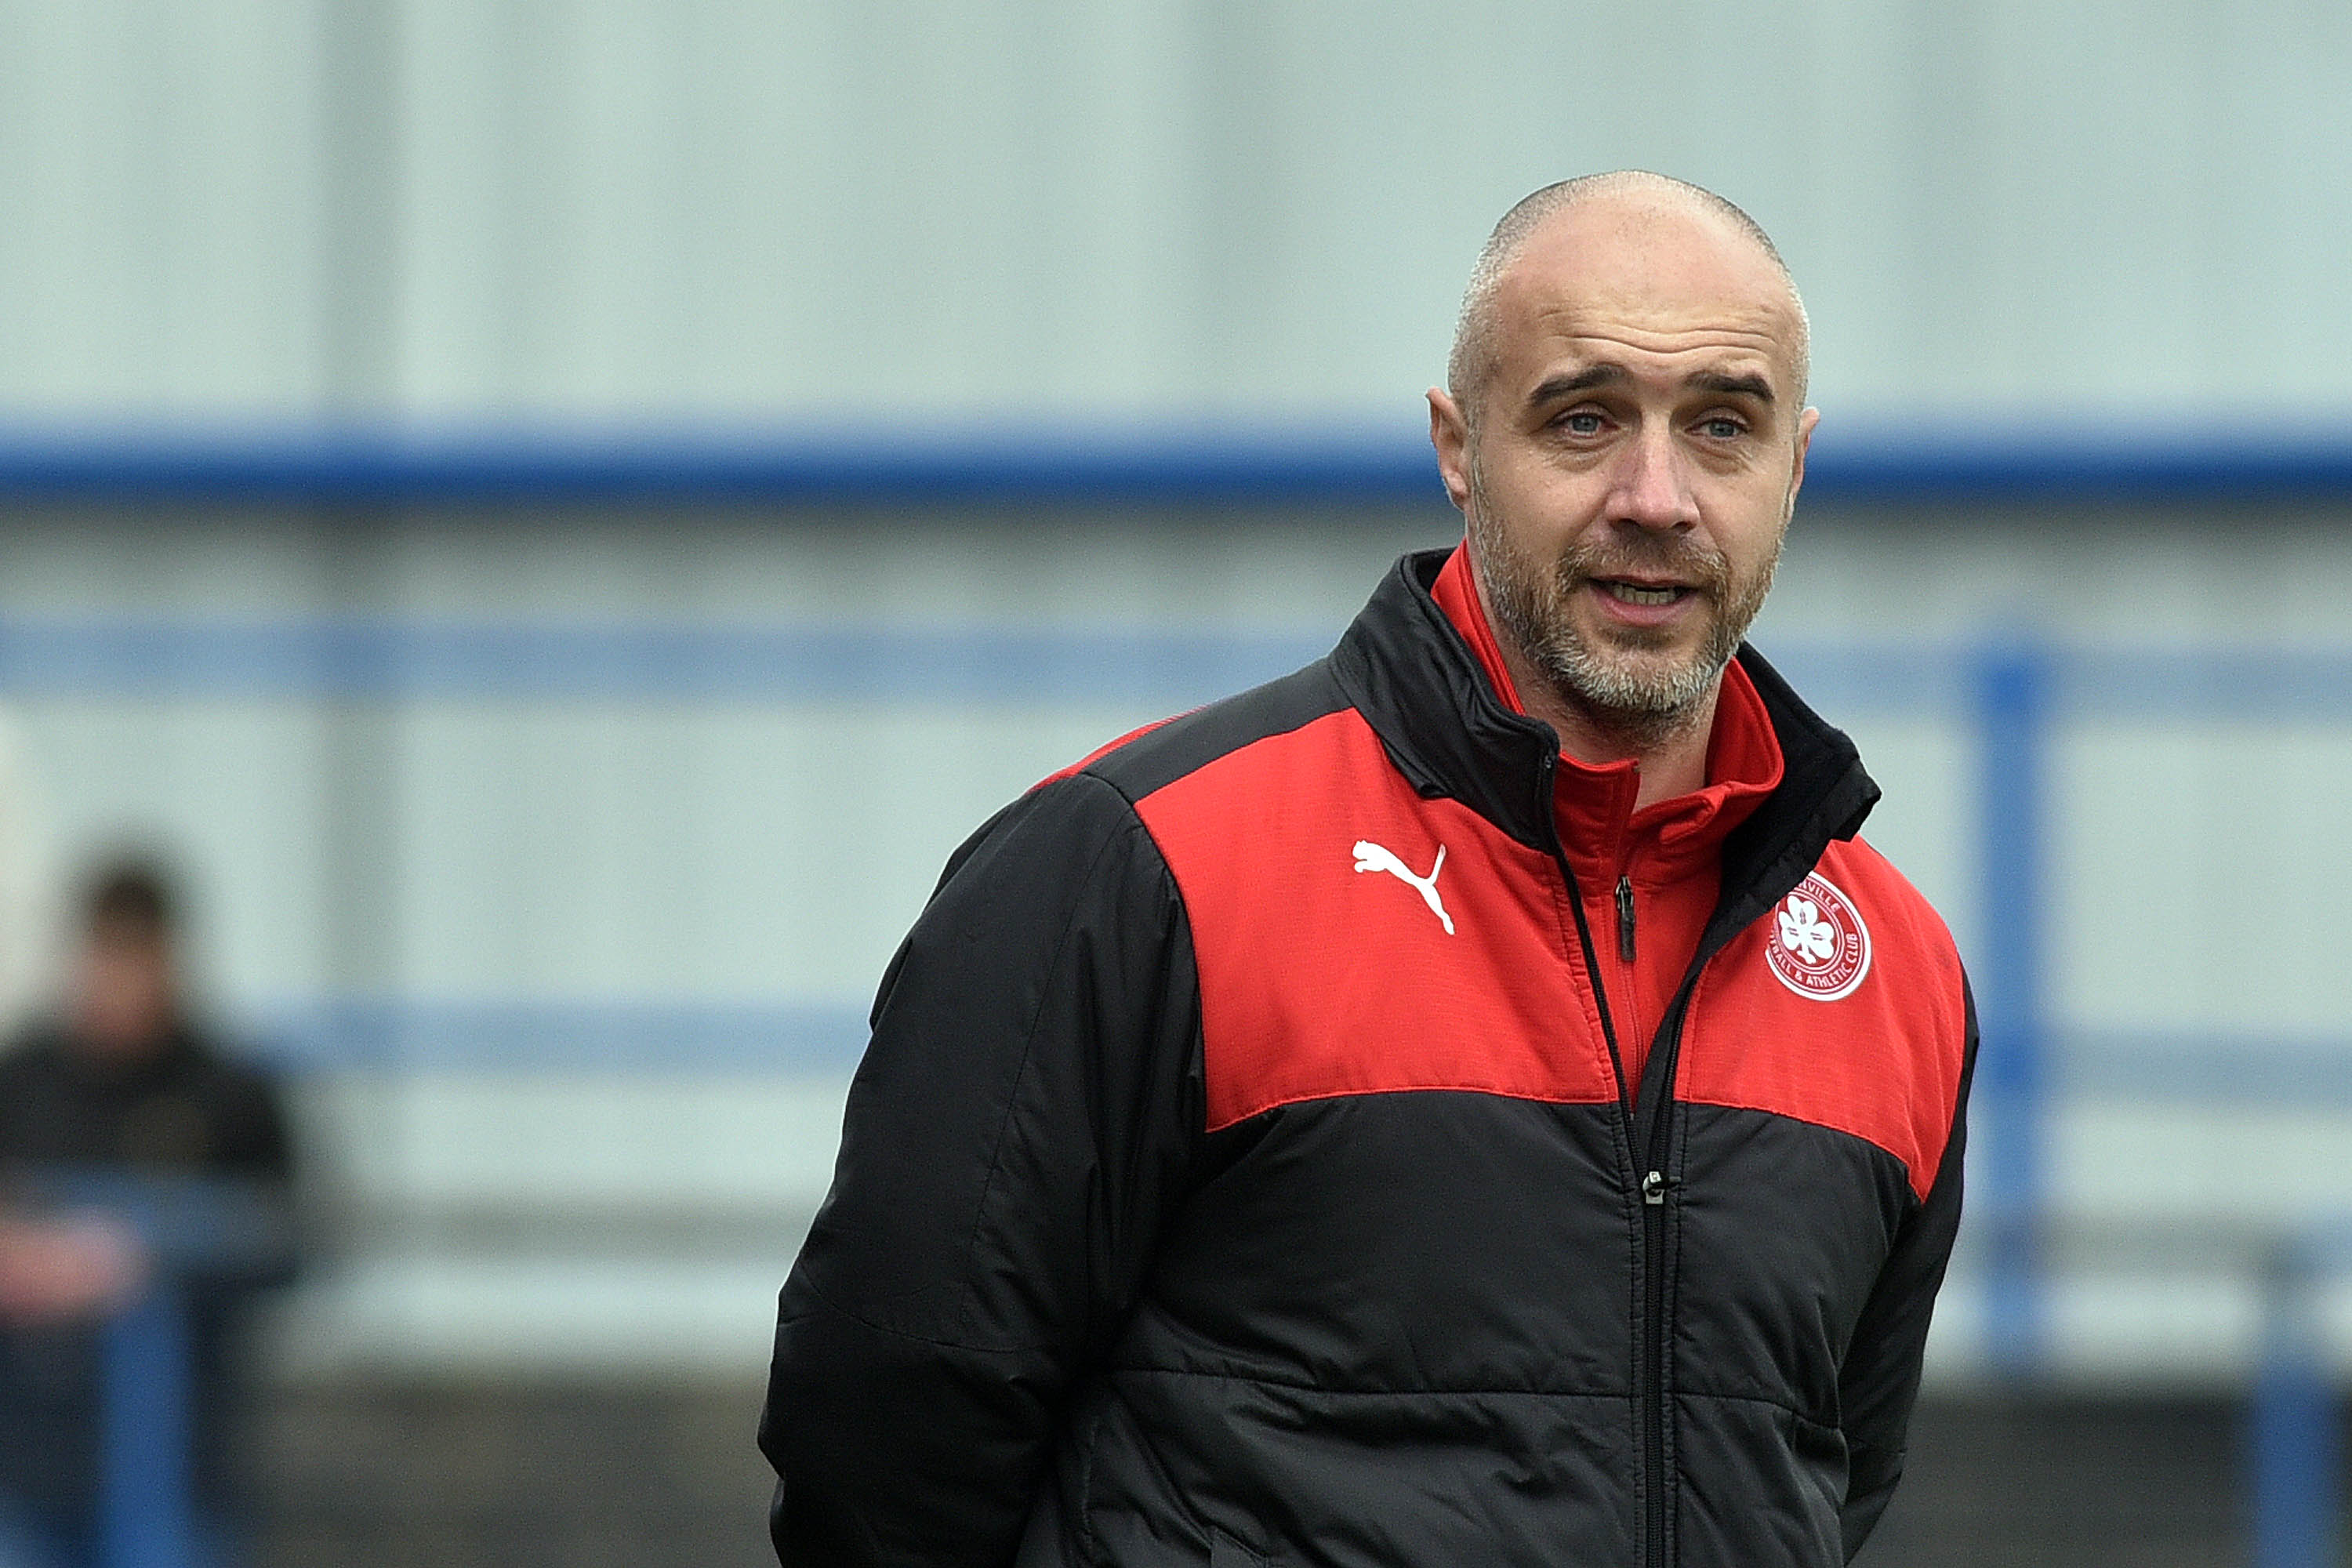 Cliftonville manager Gerard Lyttle admits Europa League opponents FC Differdange 03 are an unknown quantity 